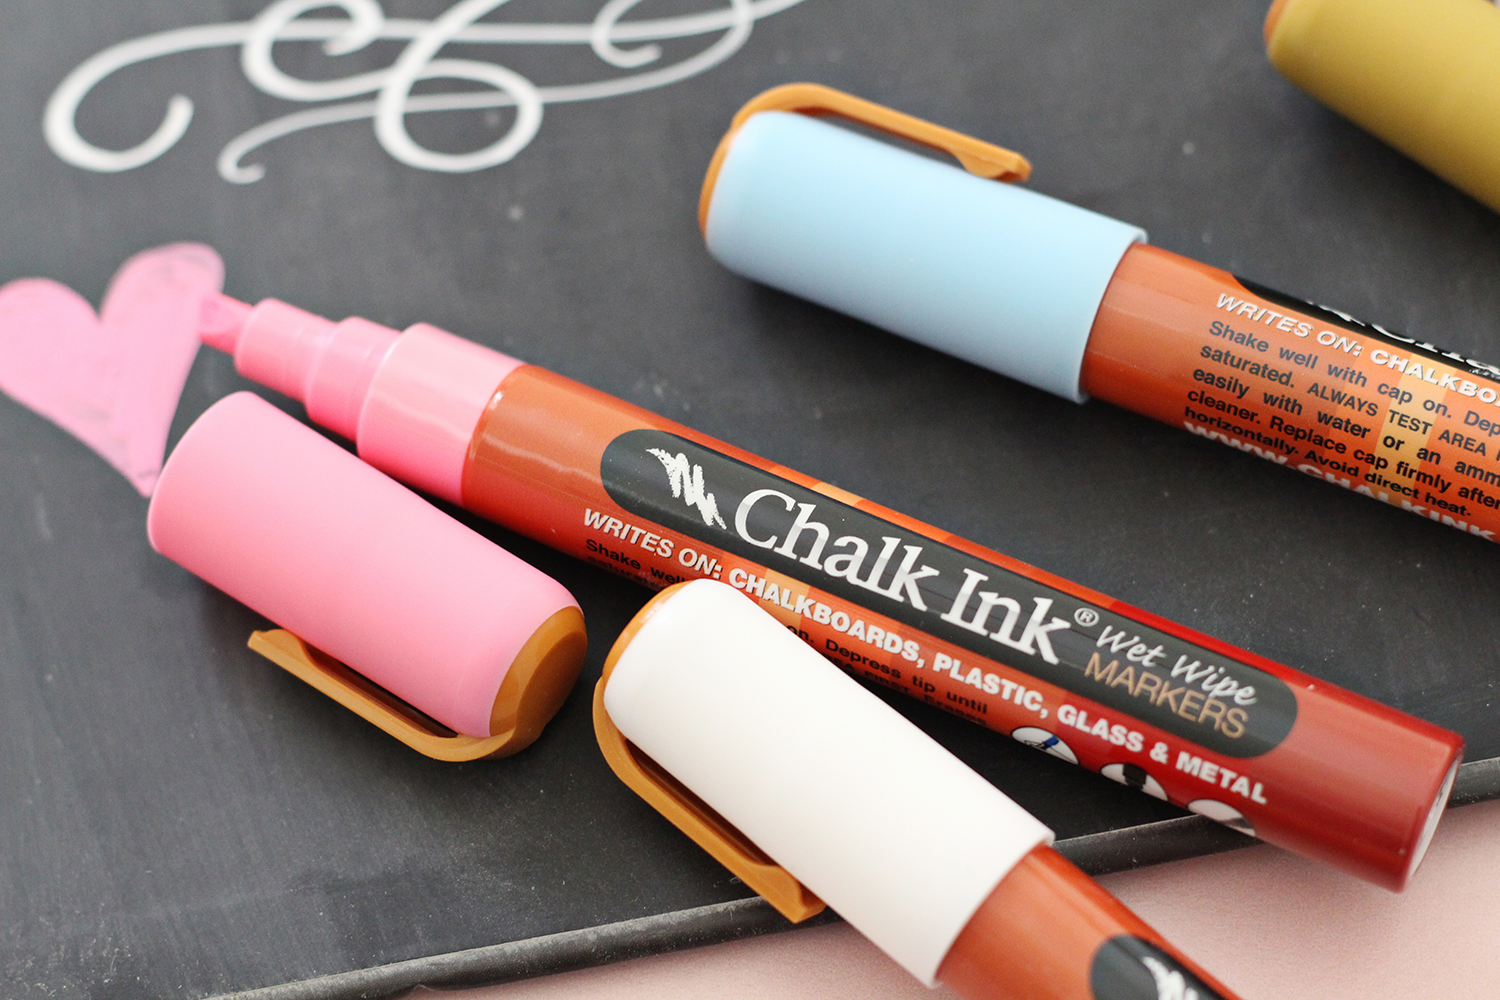 Chalk Ink Markers write on any non-porous surface